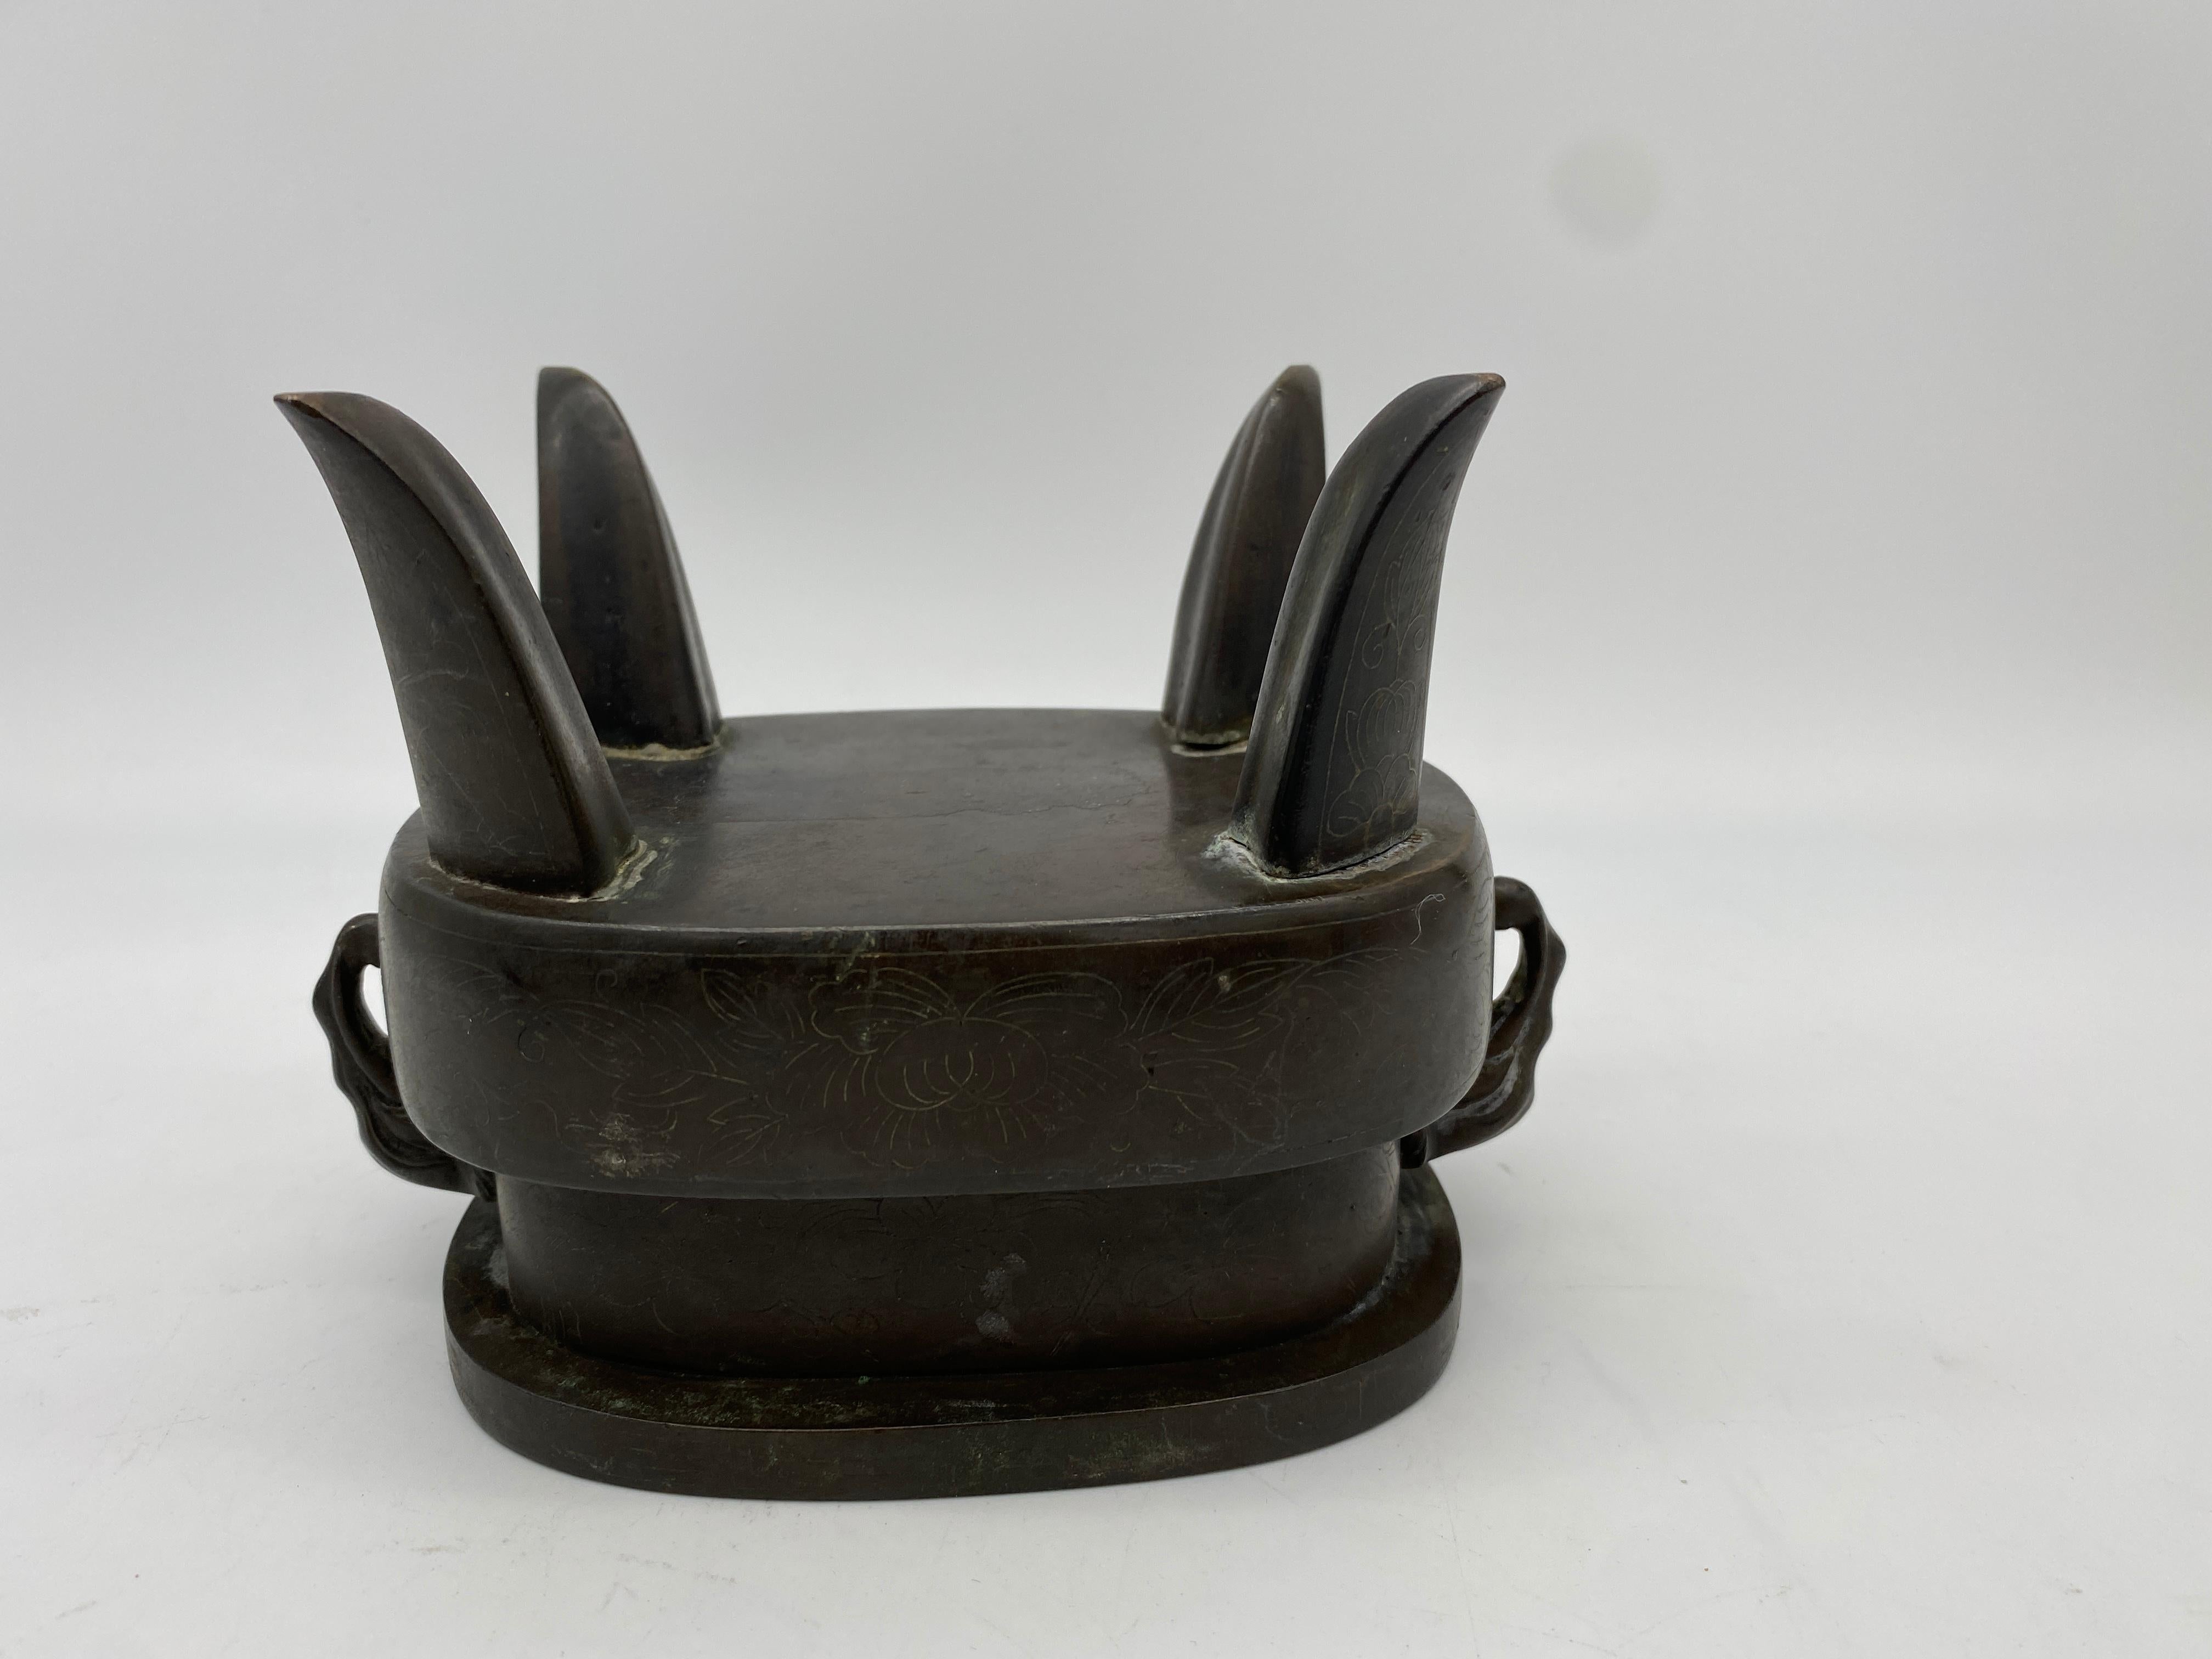 Antique Qing Dynasty Chinese Twin Handled Bronze Censer with Elephants Handles For Sale 4